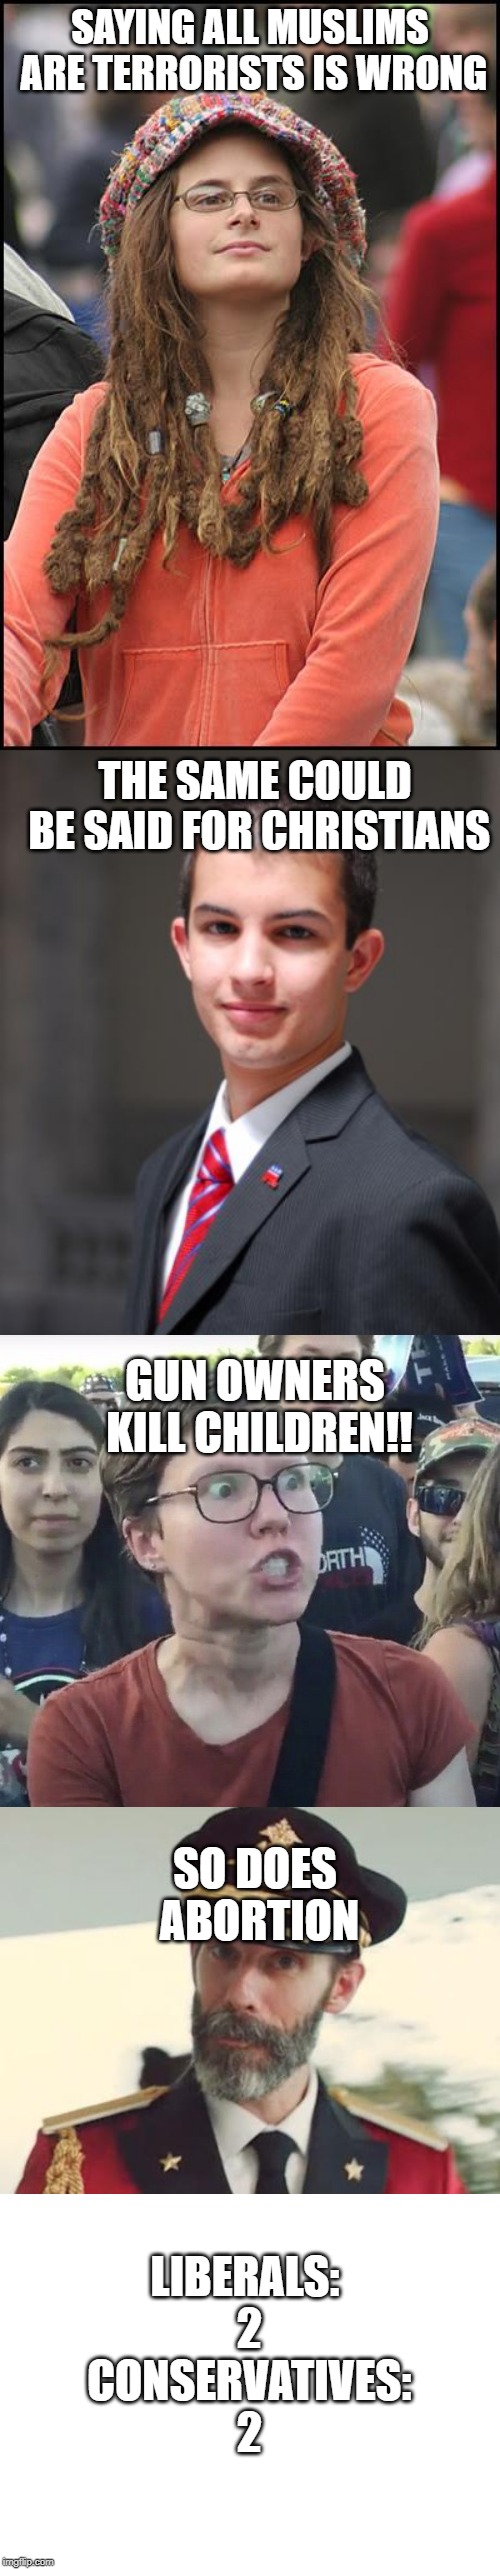 SAYING ALL MUSLIMS ARE TERRORISTS IS WRONG; THE SAME COULD BE SAID FOR CHRISTIANS; GUN OWNERS KILL CHILDREN!! SO DOES ABORTION; LIBERALS: 2 CONSERVATIVES: 2 | image tagged in memes,college liberal,college conservative,blank white template,captain obvious,triggered feminist | made w/ Imgflip meme maker